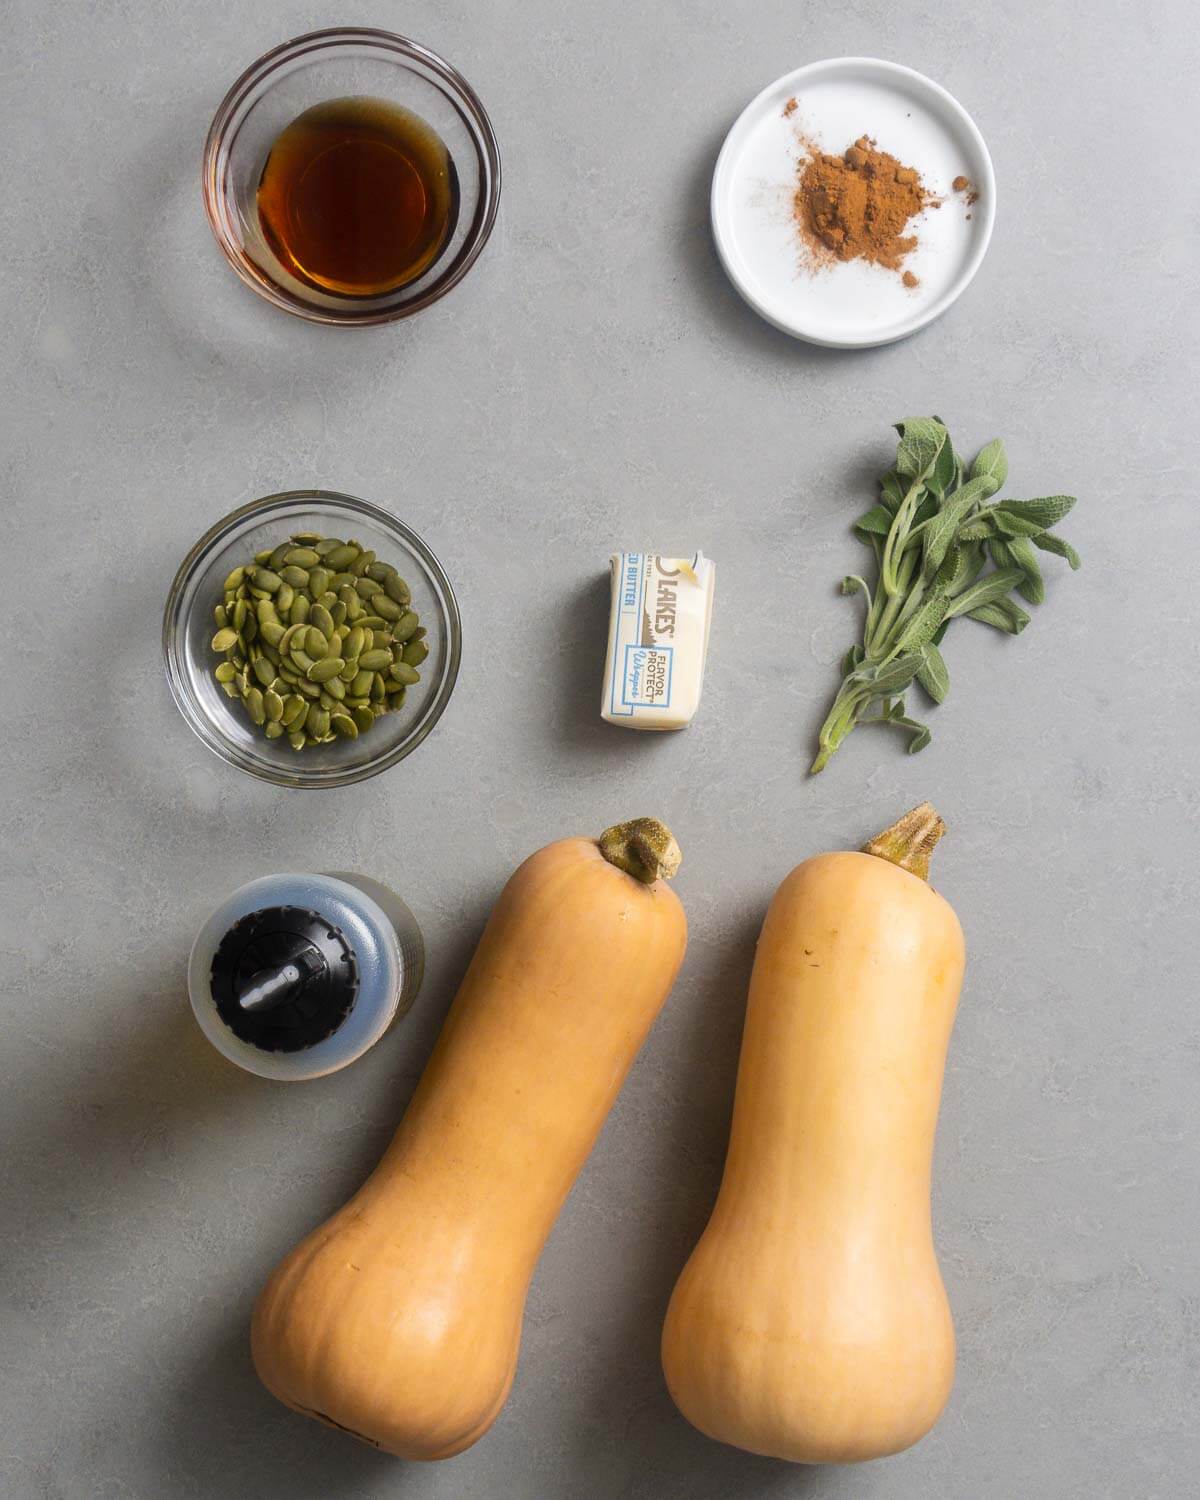 Ingredients shown: maple syrup, cinnamon, pumpkin seeds, butter, sage, olive oil, and butternut squash.